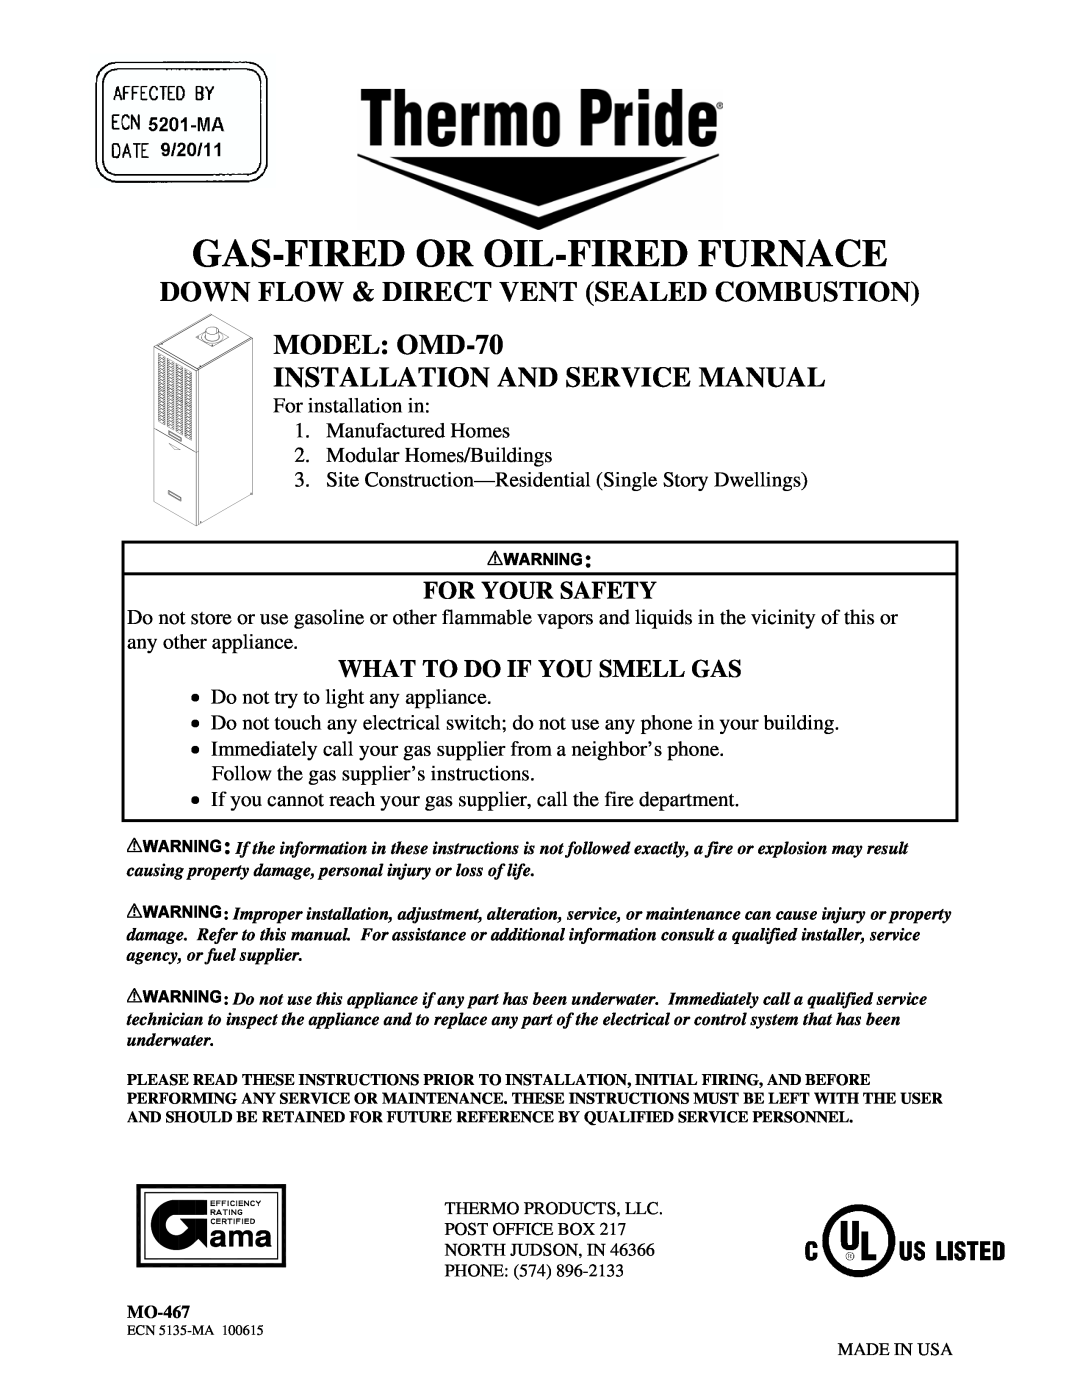 Thermo Products omd-70 service manual Gas-Firedor Oil-Firedfurnace, Down Flow & Direct Vent Sealed Combustion 